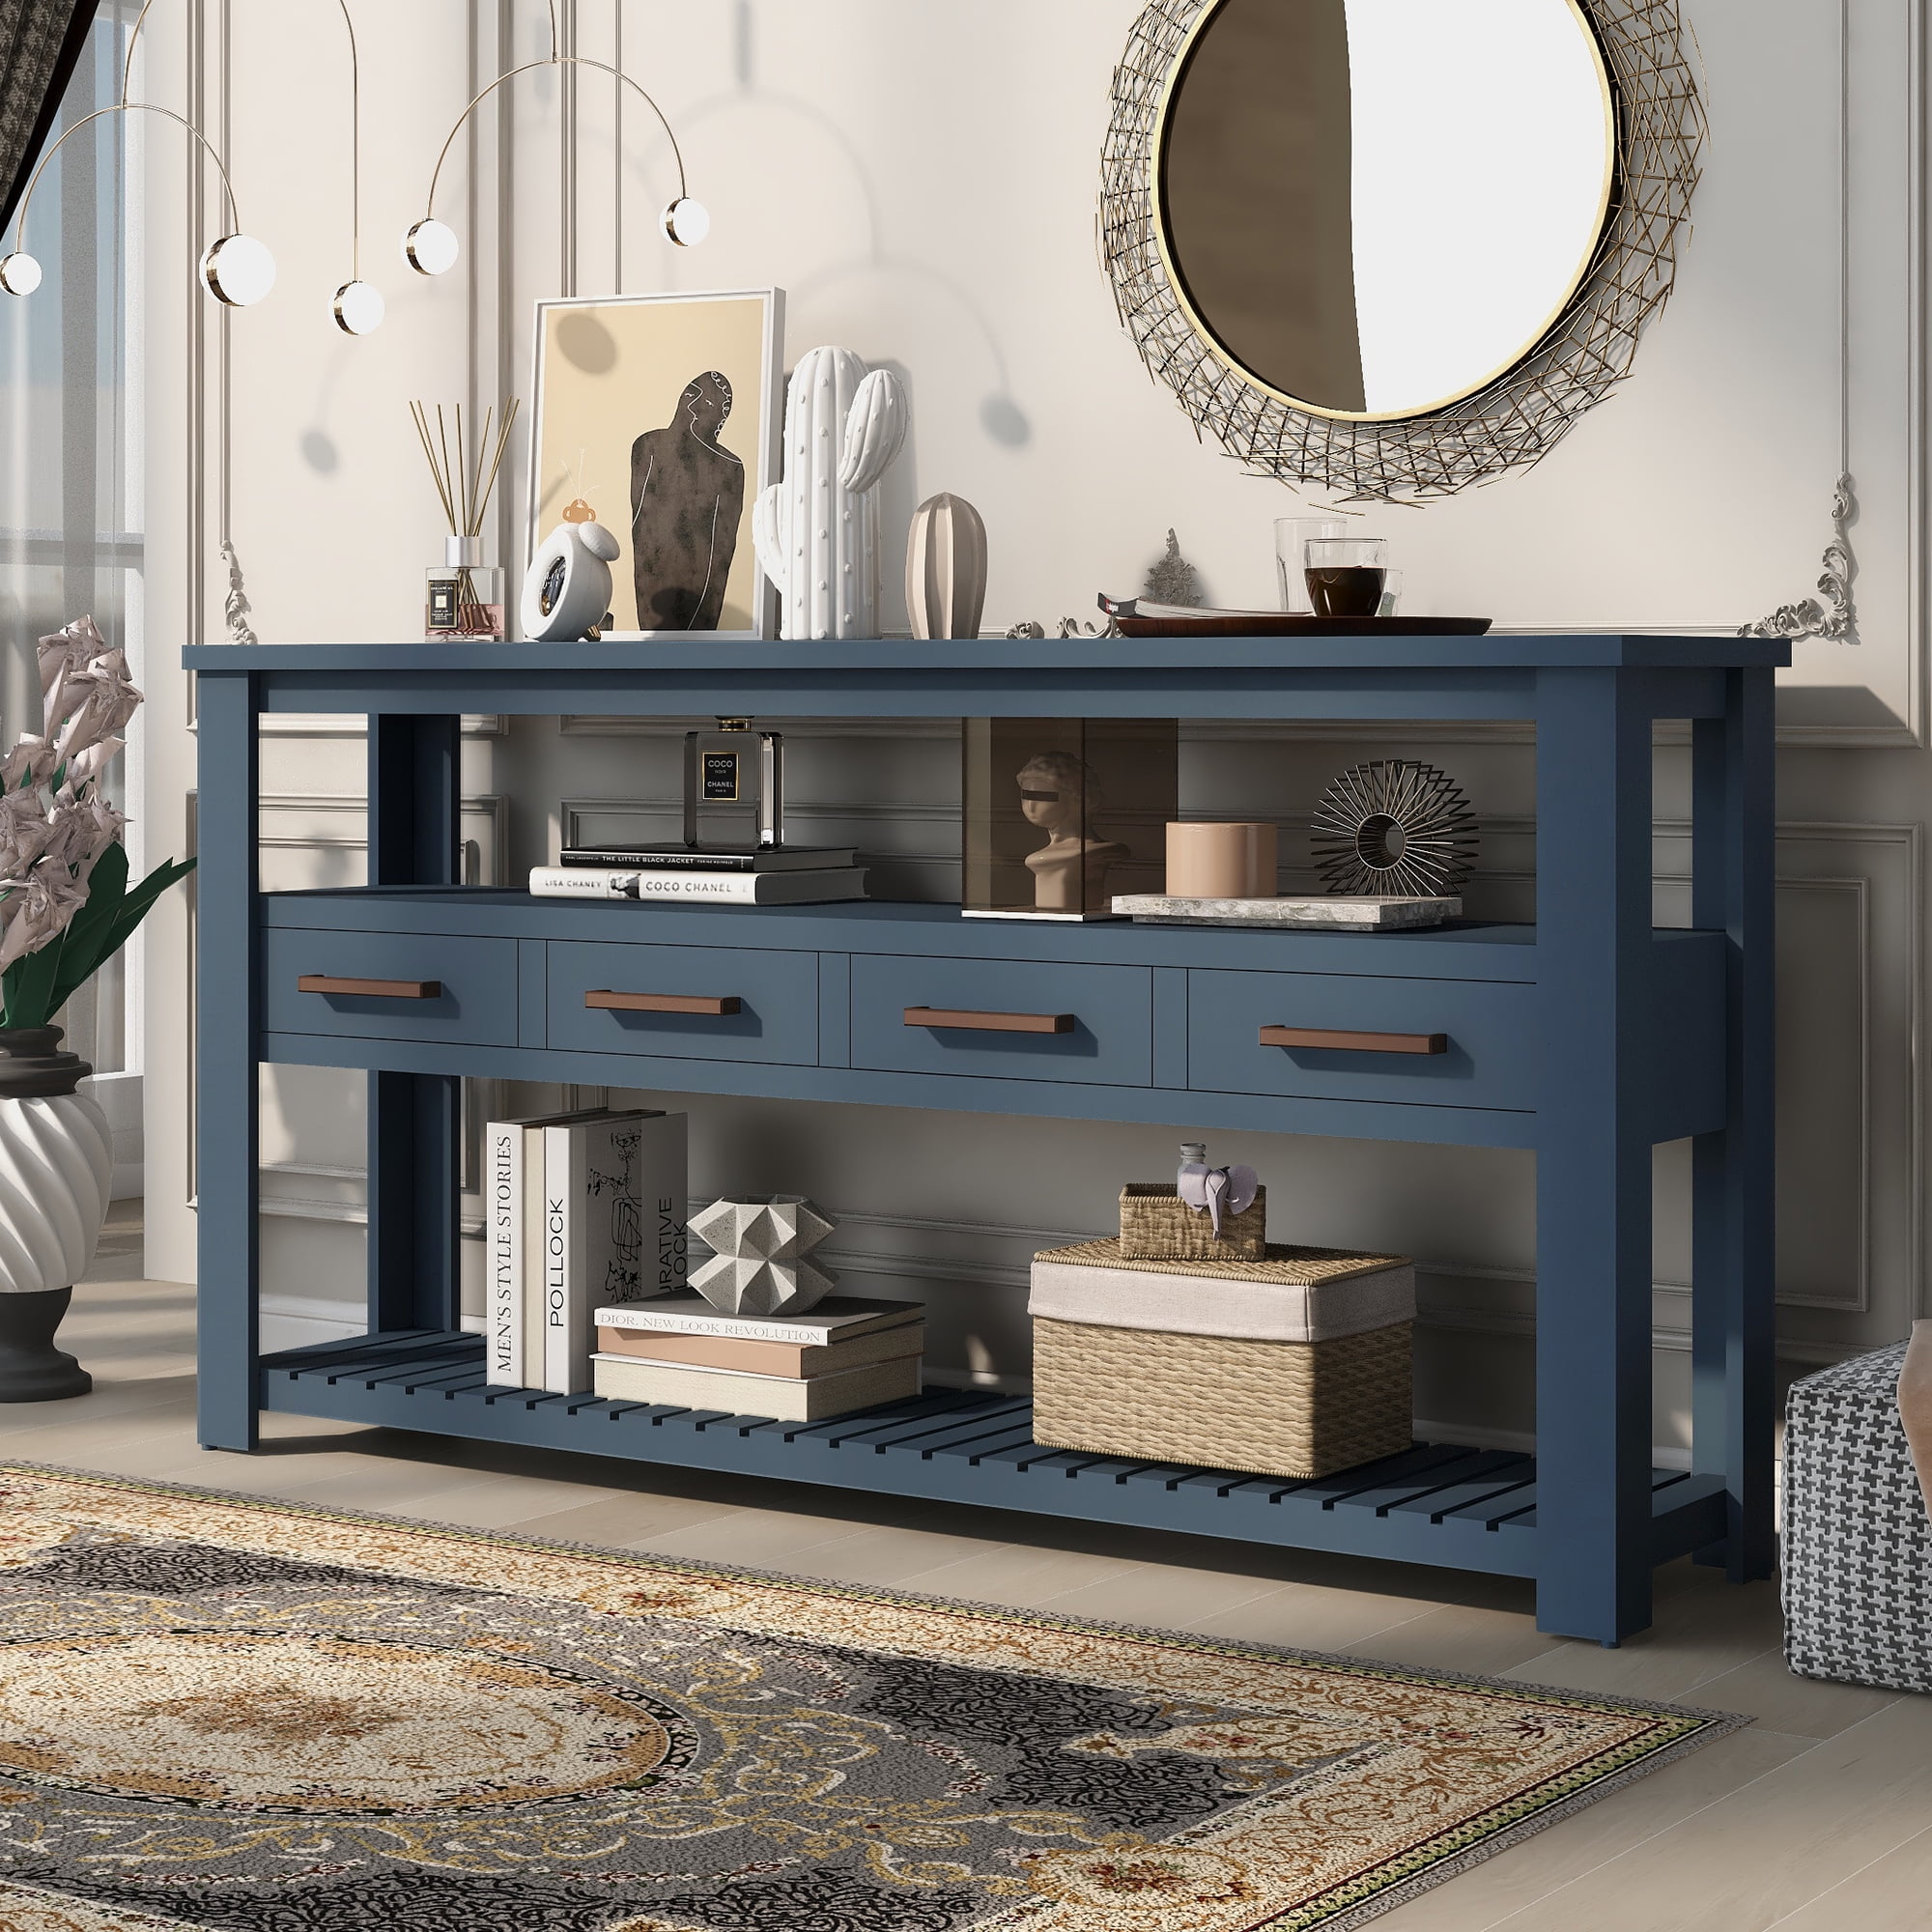 Console Table 62 2 Modern Sofa With 4 Drawers And Shelves Wood Entry Sideboard Buffet Narrow Long For Living Room Kitchen Dining Entryway Storage Hallway Blue